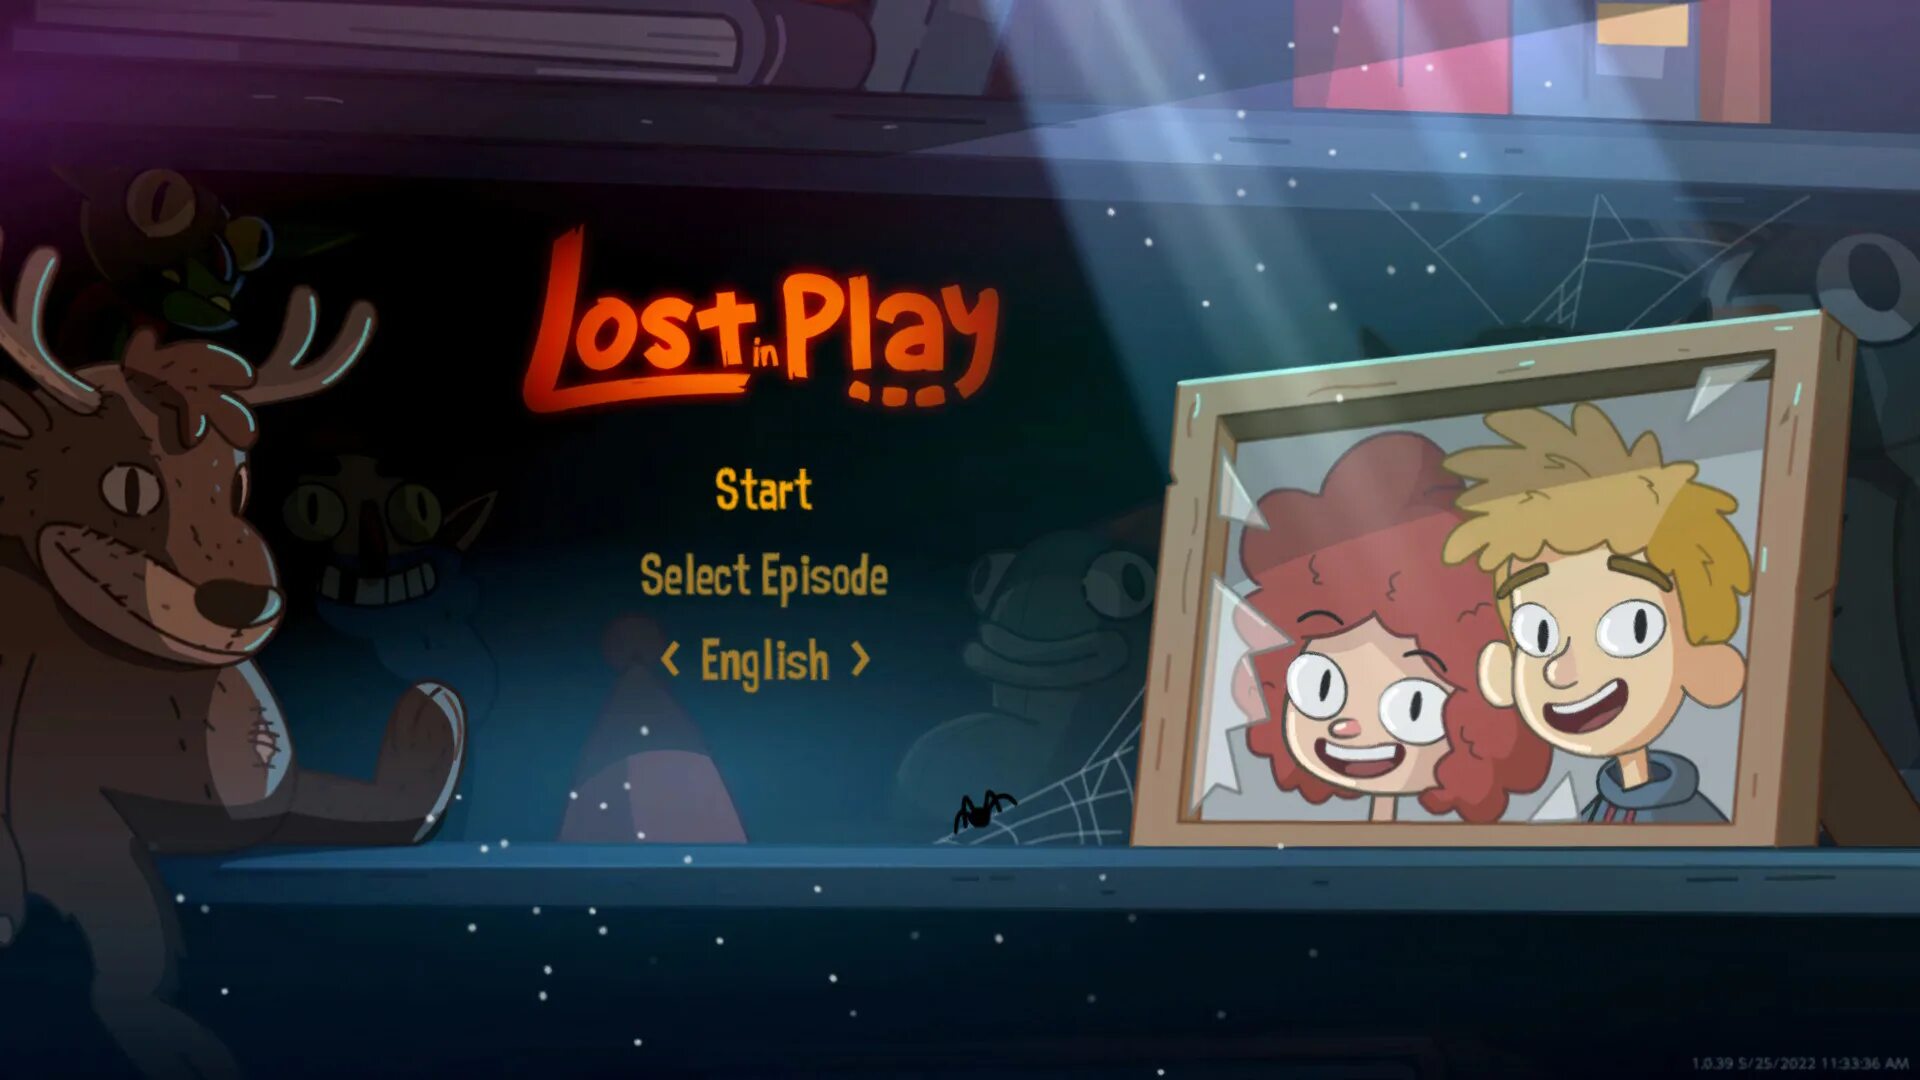 I play game перевод. Lost in Play. Lost in Play game. Lost in Play 2. Lost in Play эпизоды.